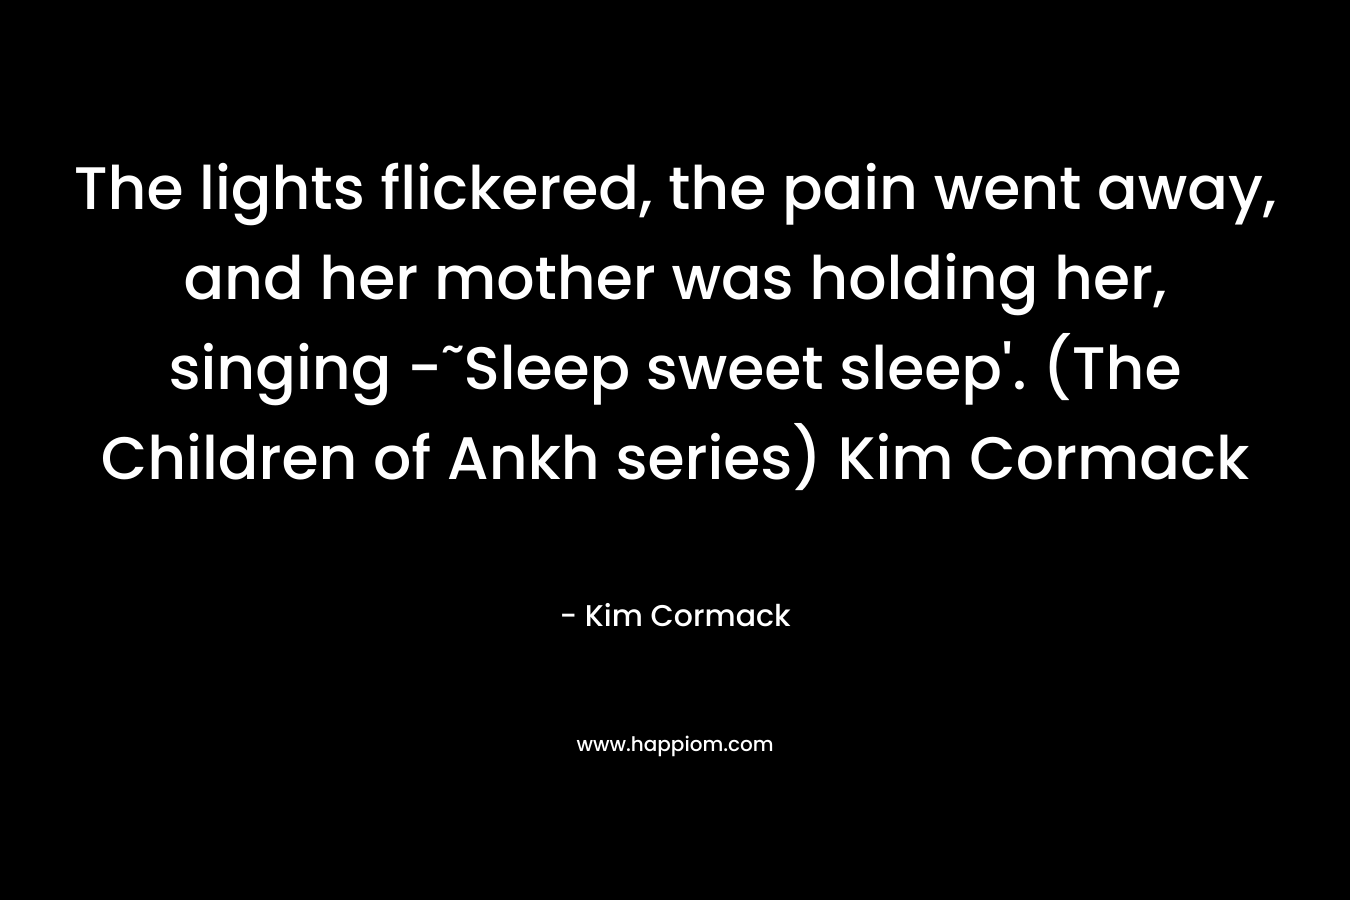 The lights flickered, the pain went away, and her mother was holding her, singing -˜Sleep sweet sleep'. (The Children of Ankh series) Kim Cormack